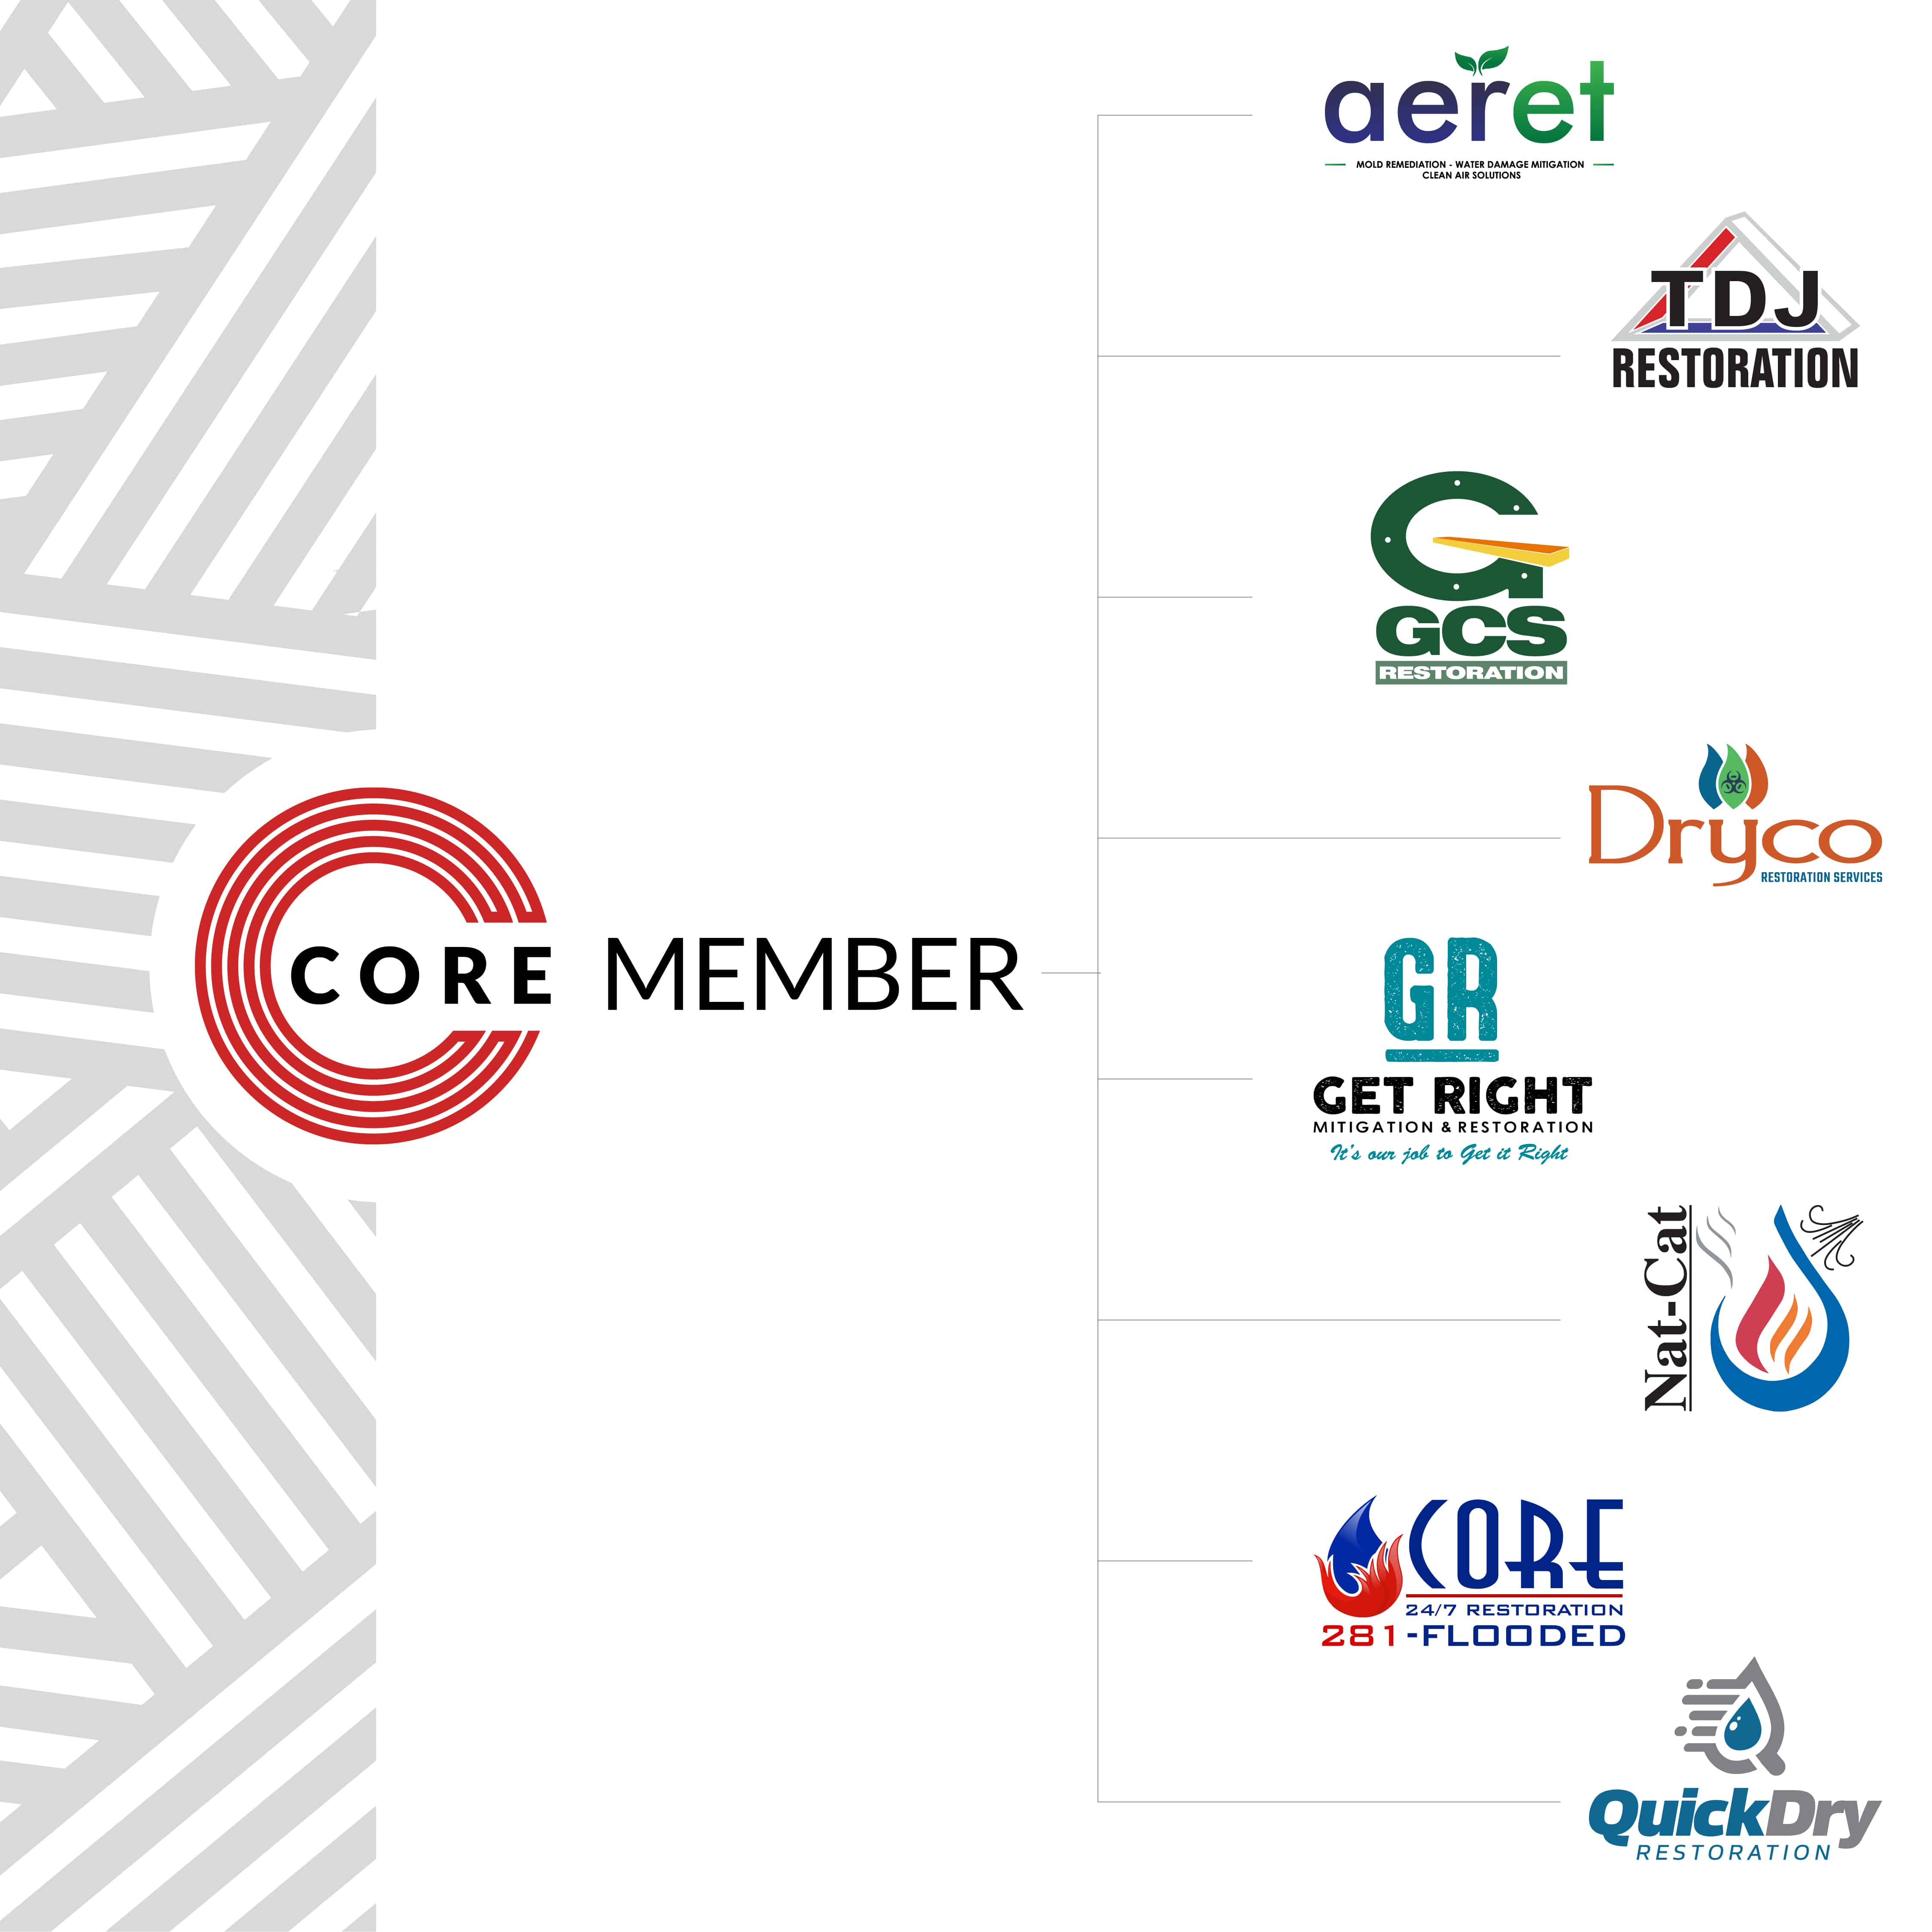 Eight Independent Restorers across North America Join as CORE Members